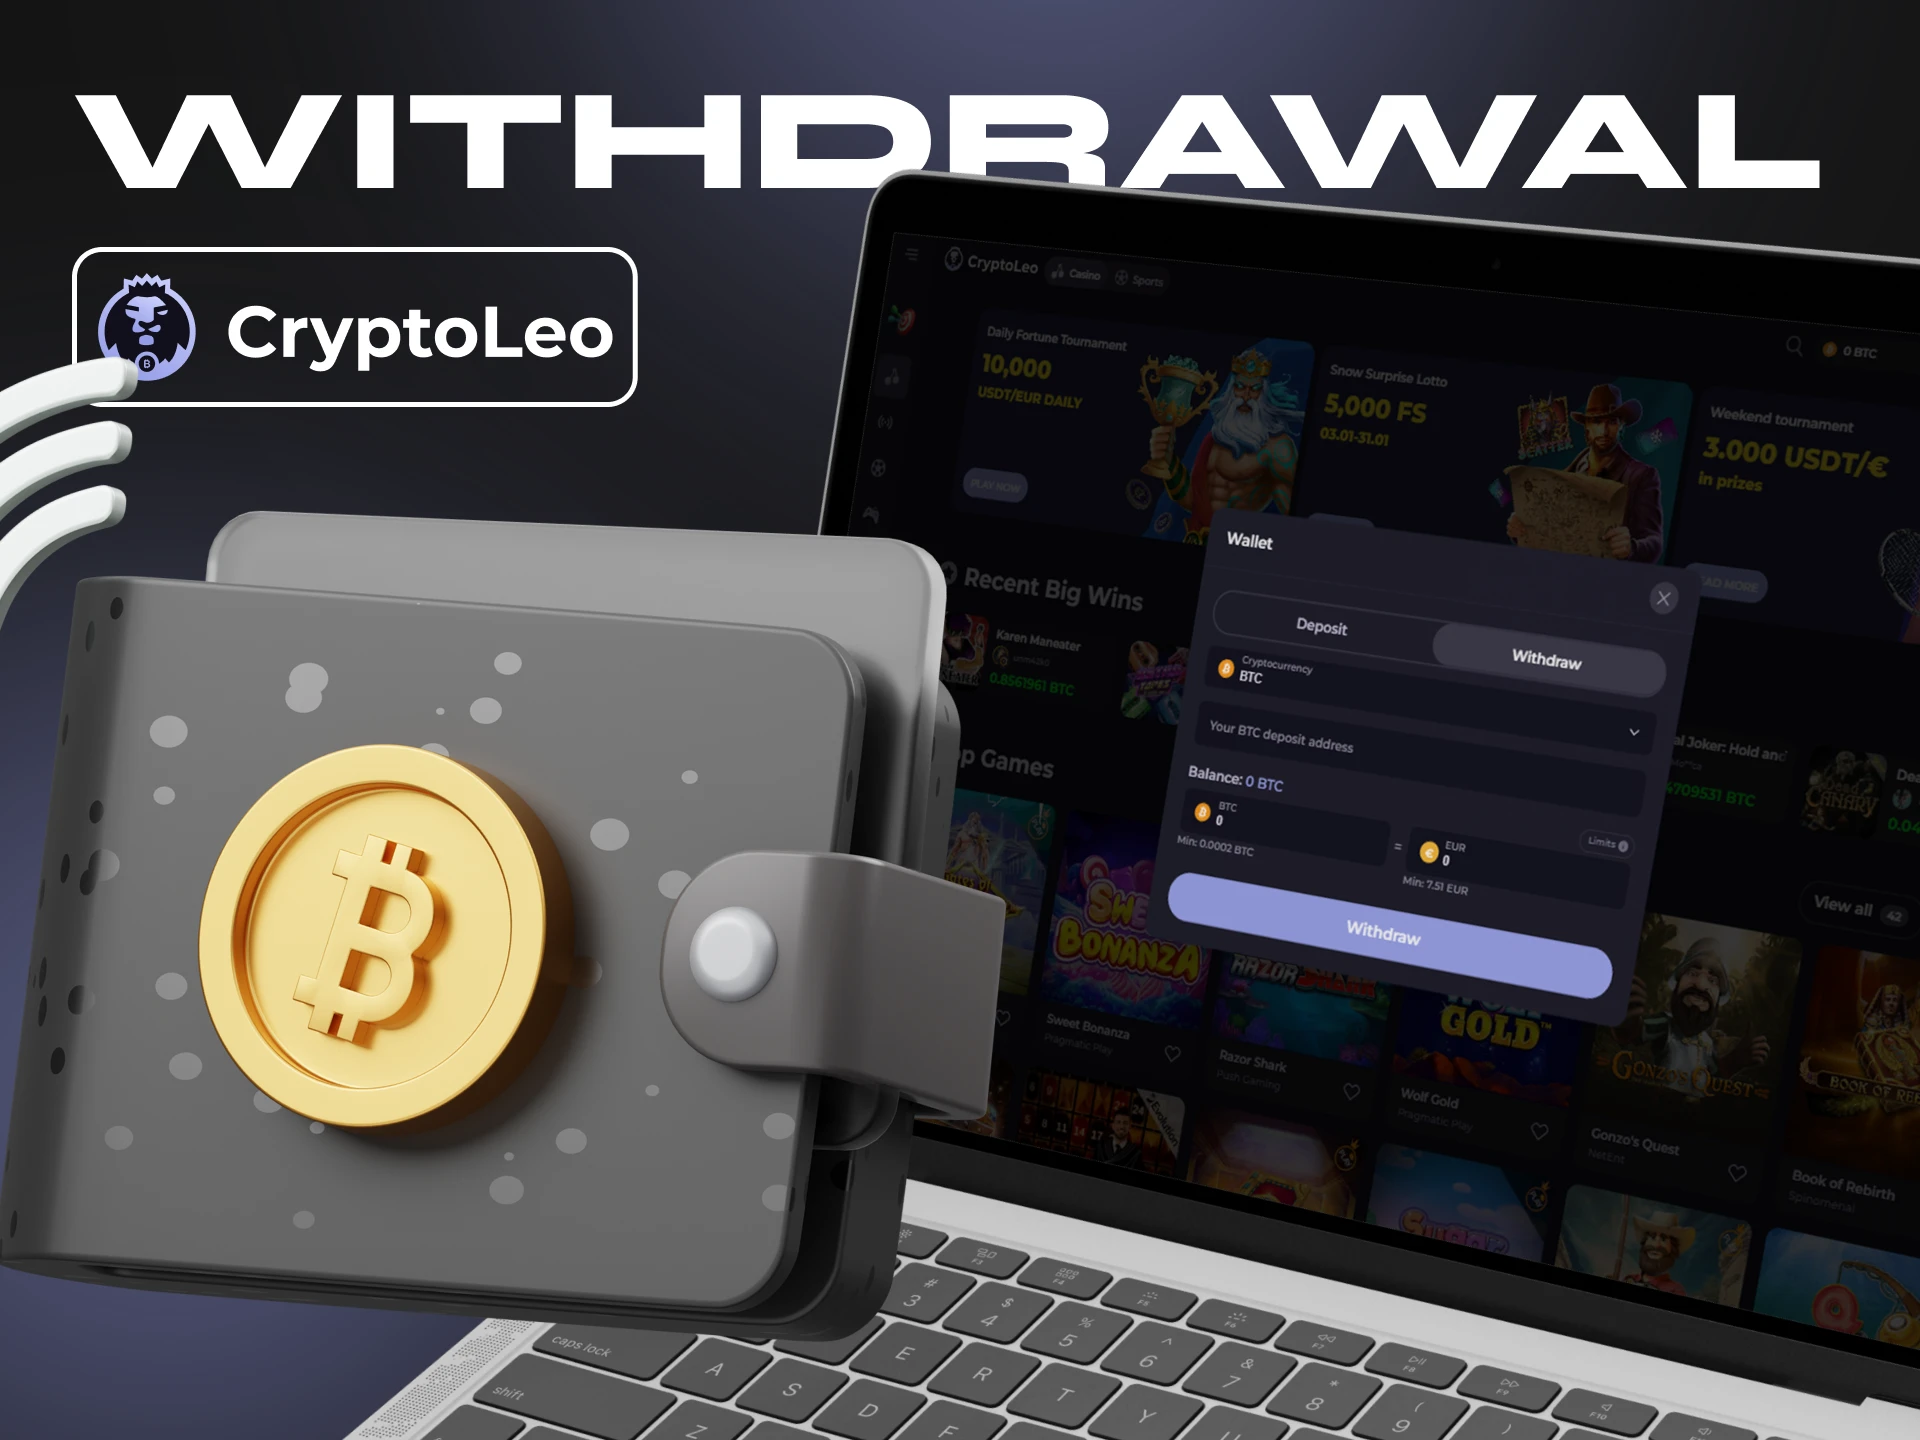 Withdraw money from your Cryptoleo account in seconds.